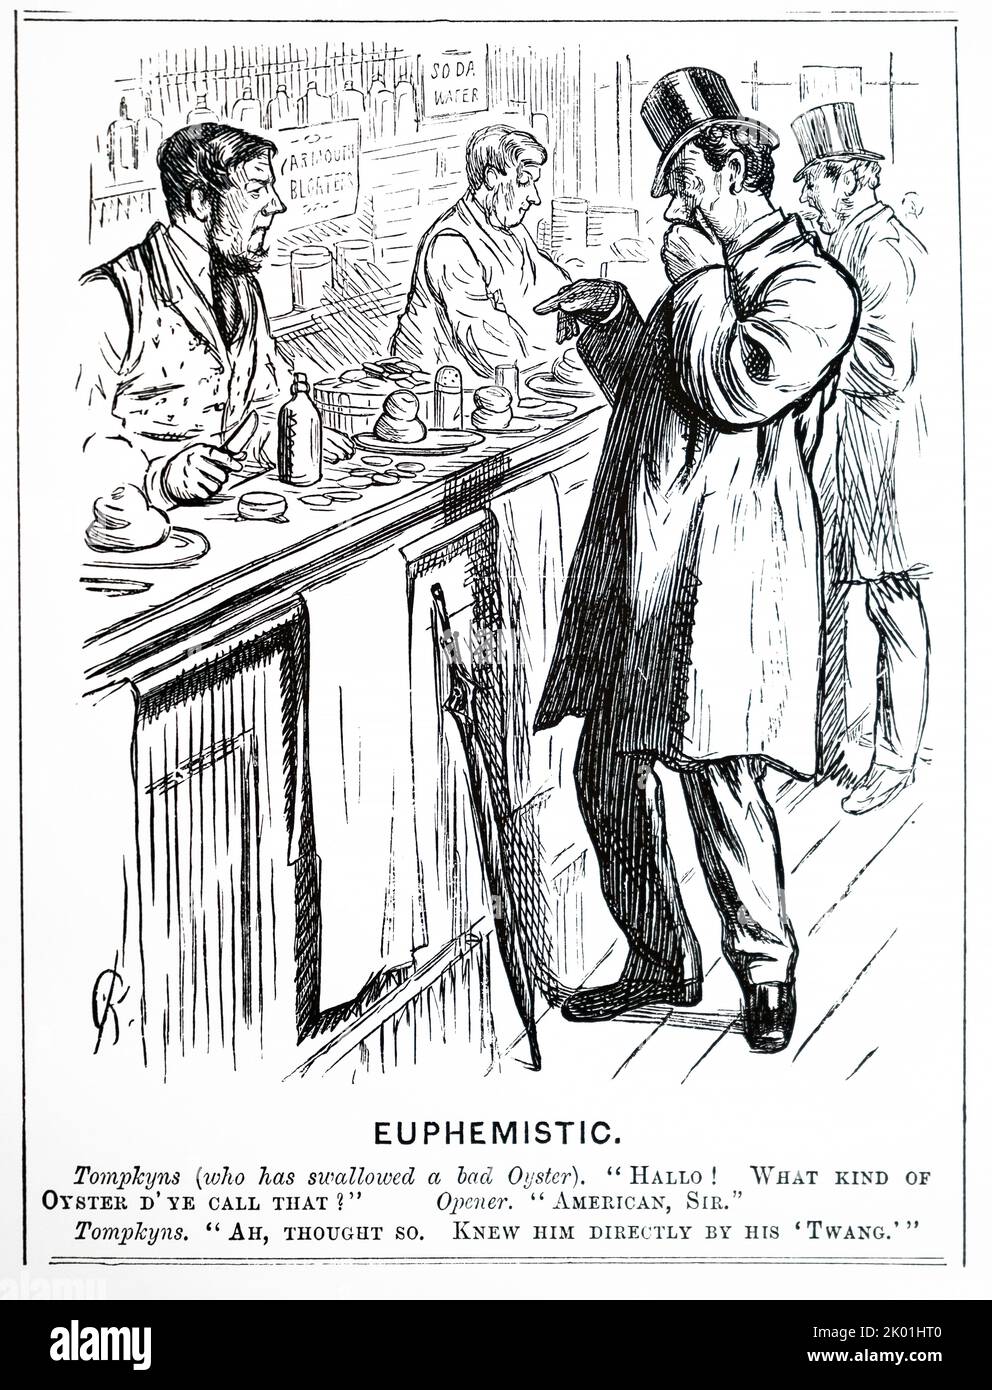 Food poisoning: a bad oyster. Illustration from Punch, London, 25 August 1874. Stock Photo